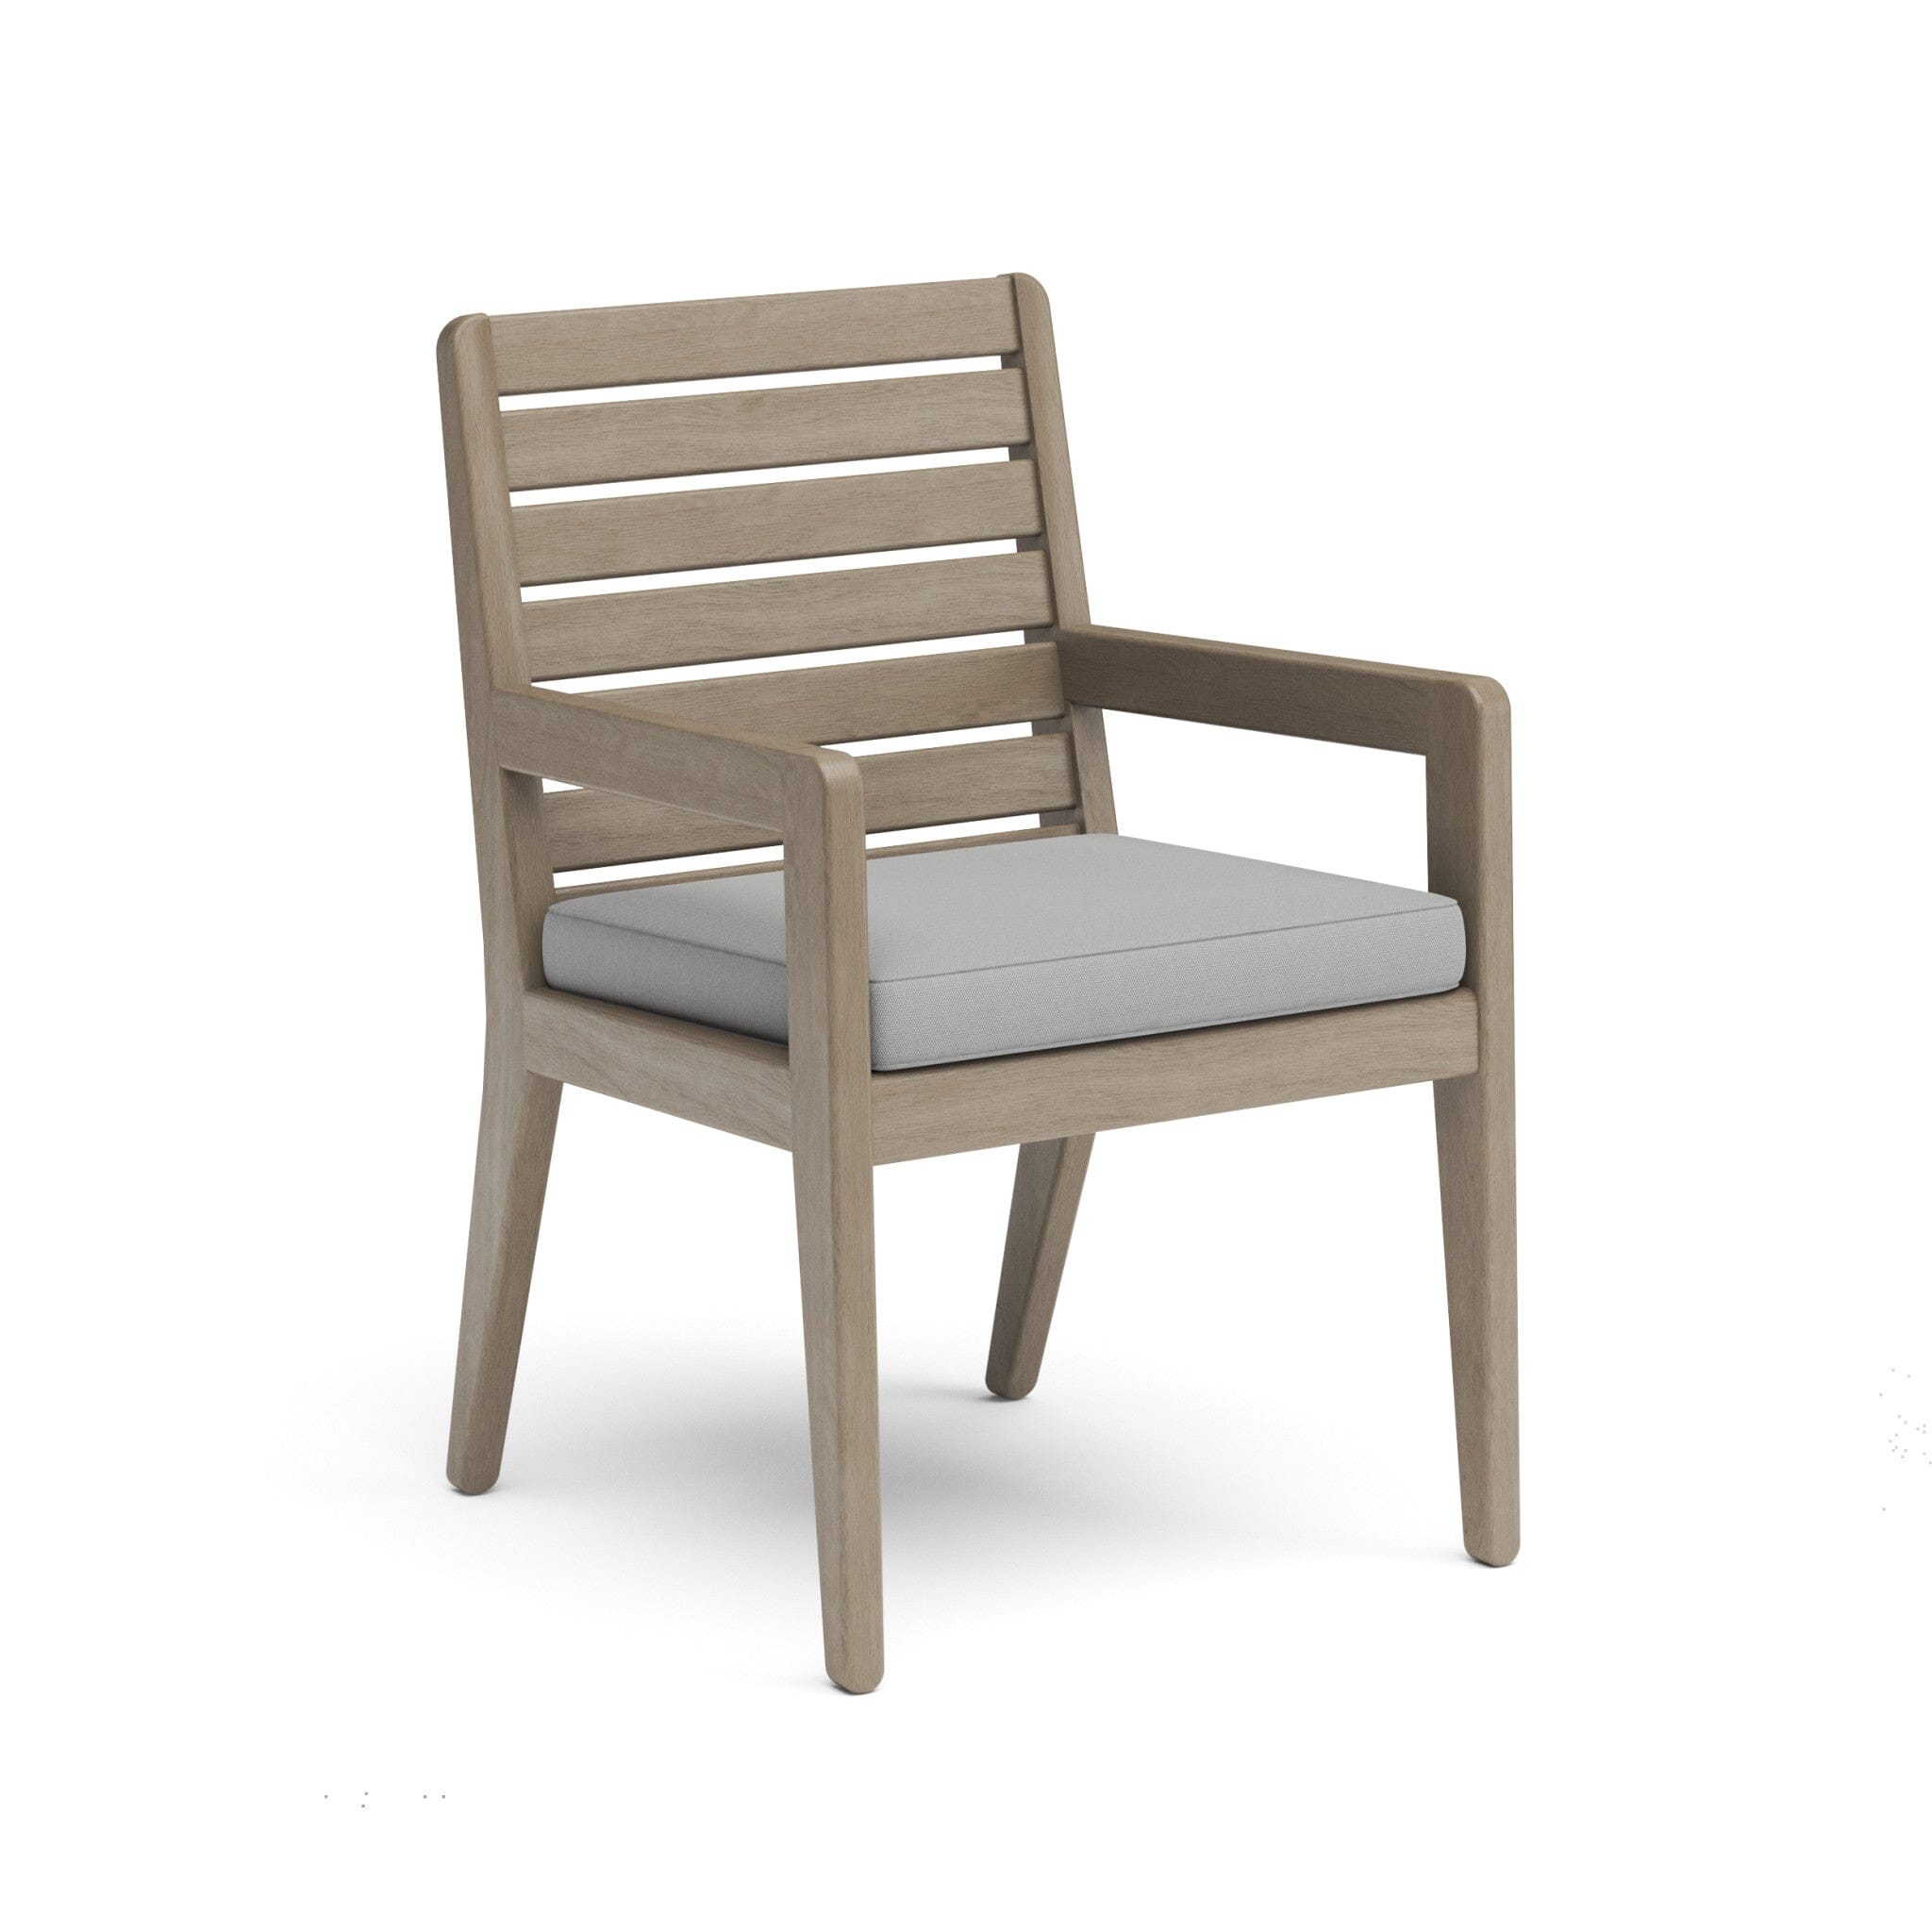 Transitional Outdoor Dining Armchair Pair By Sustain Outdoor Dining Chair Sustain